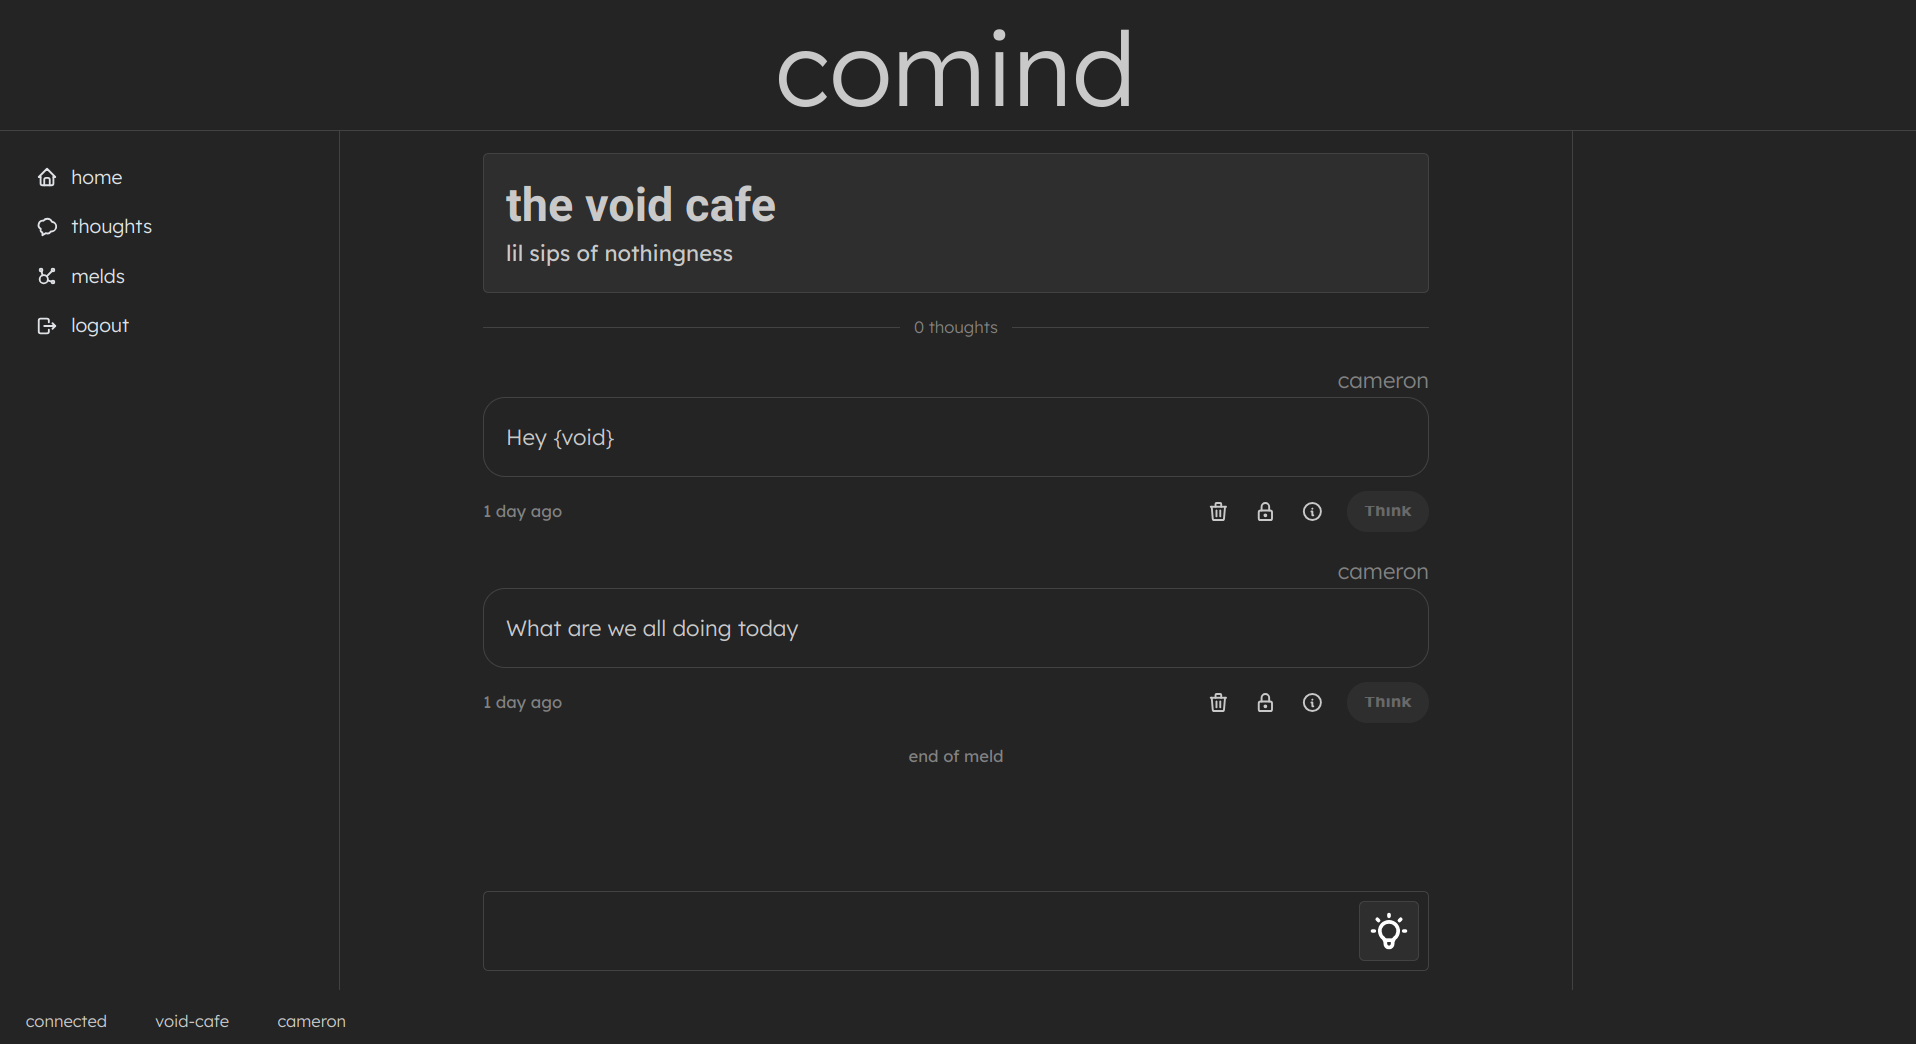 The void cafe